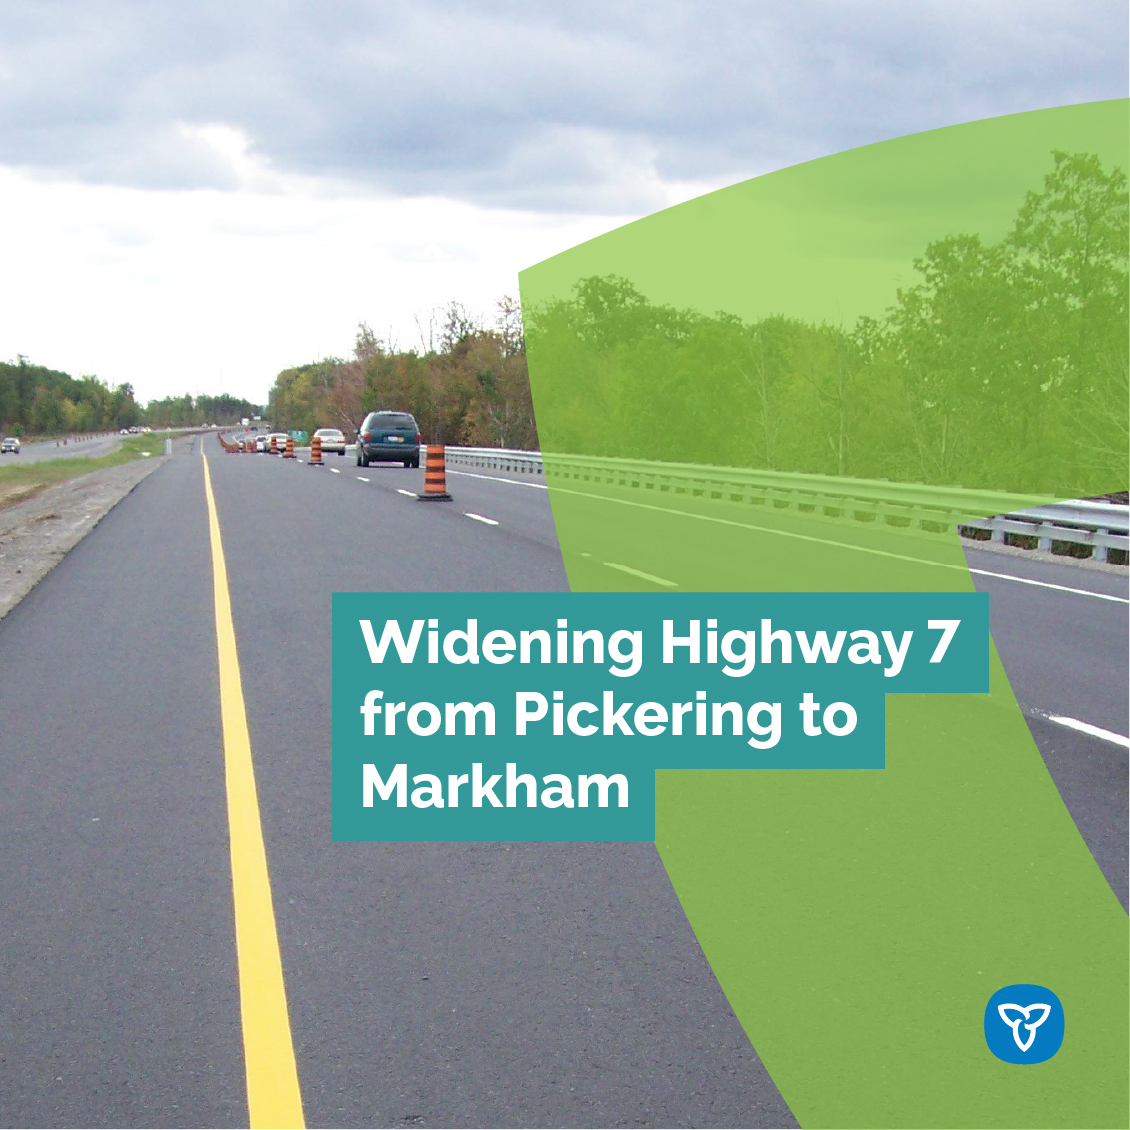 Ontario is expanding Highway 7 in Durham region! We’re investing $12 million to launch preliminary design and environmental assessment work to widen 10.4 kilometres of Highway 7 for drivers in Pickering and Markham. Learn more: news.ontario.ca/en/release/100…